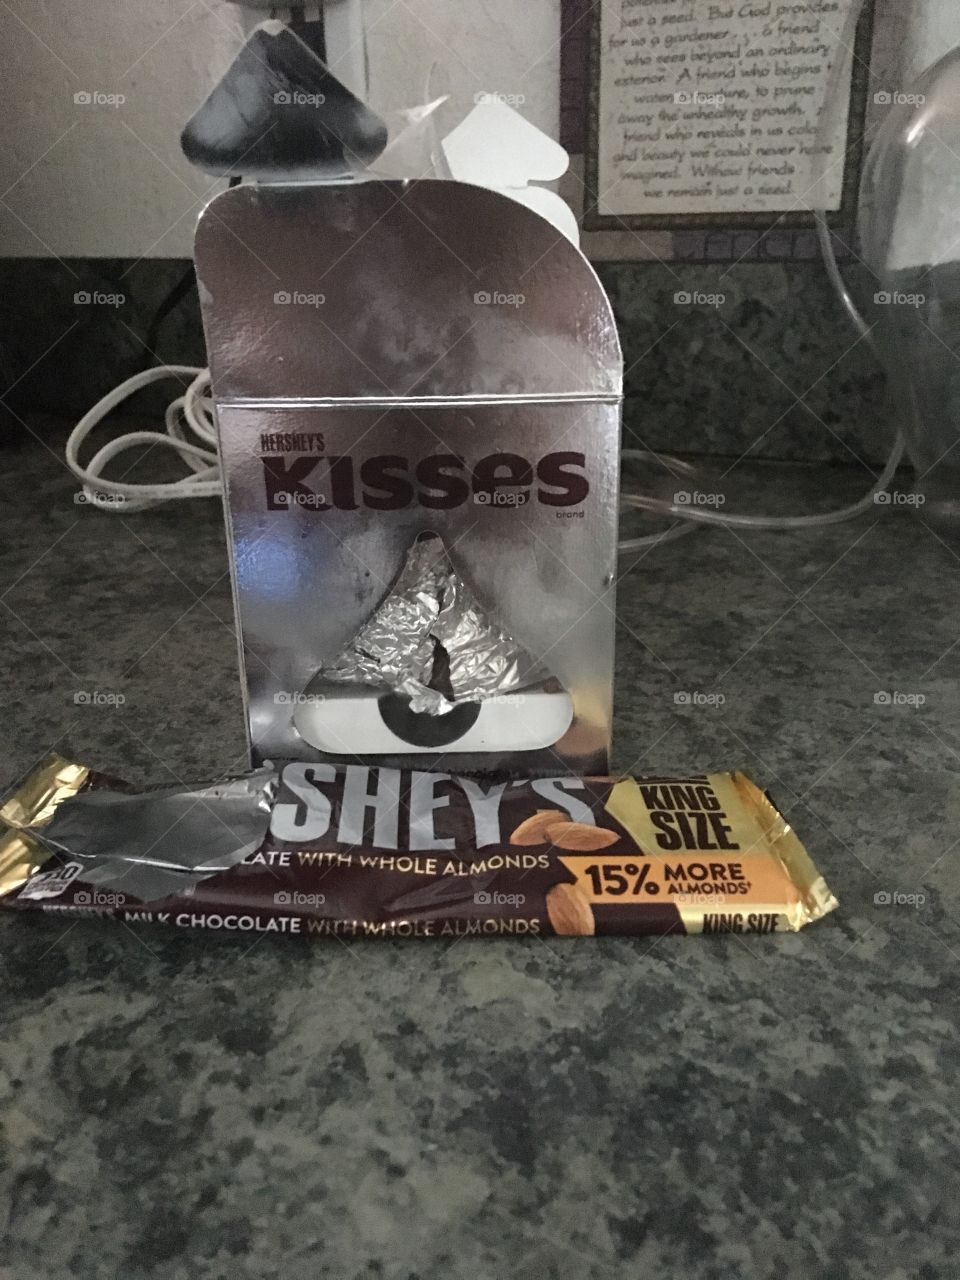 Who doesn’t like chocolate? Kisses anyone?  How about a Hershey candy bar? Indulgence.